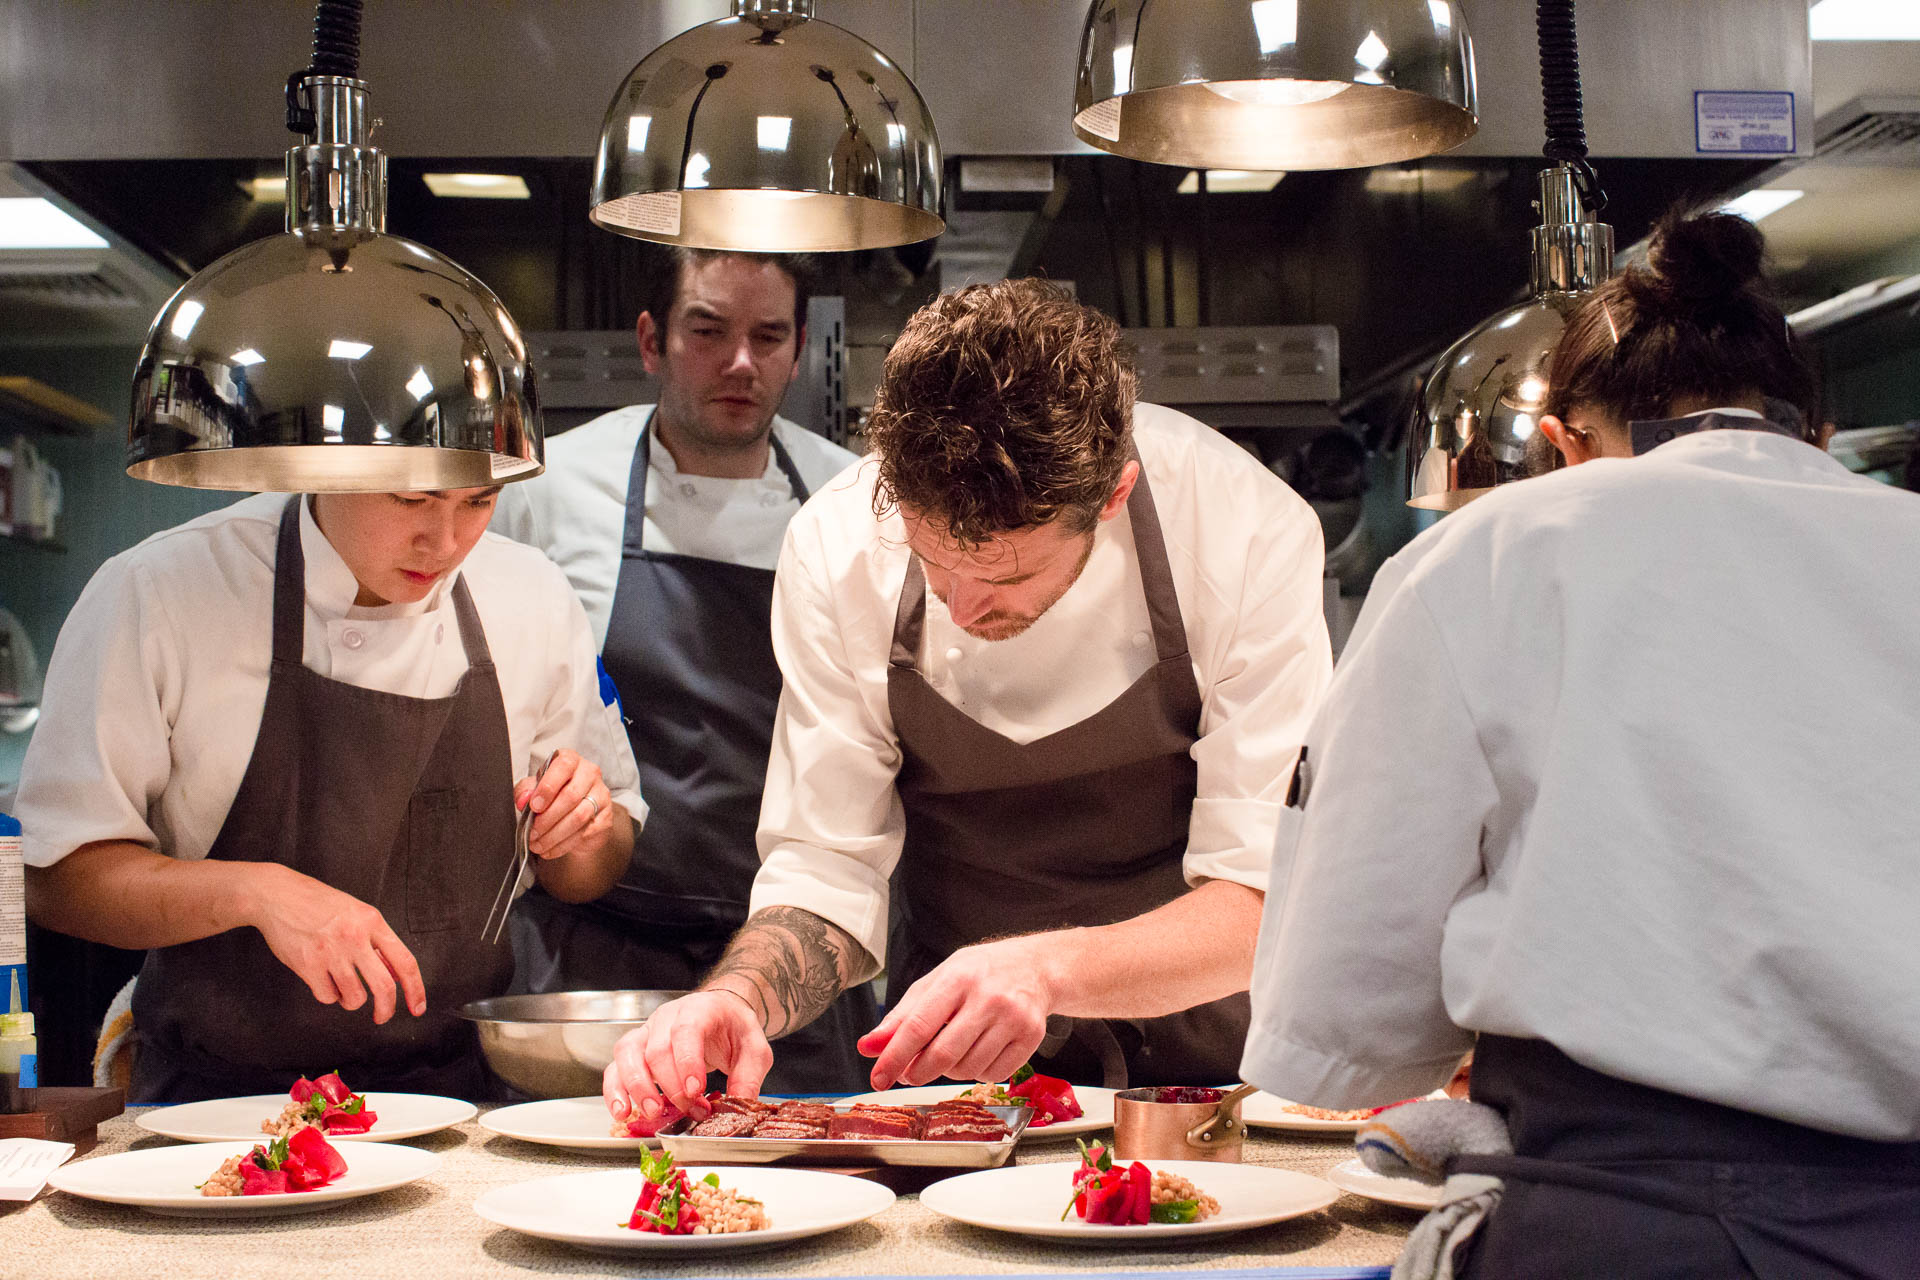 Gelinaz Shuffle, Chef Jock Zonfrillo and the Manresa team plating wagyu beef and ribbons of beets. // lickmyspoon.com